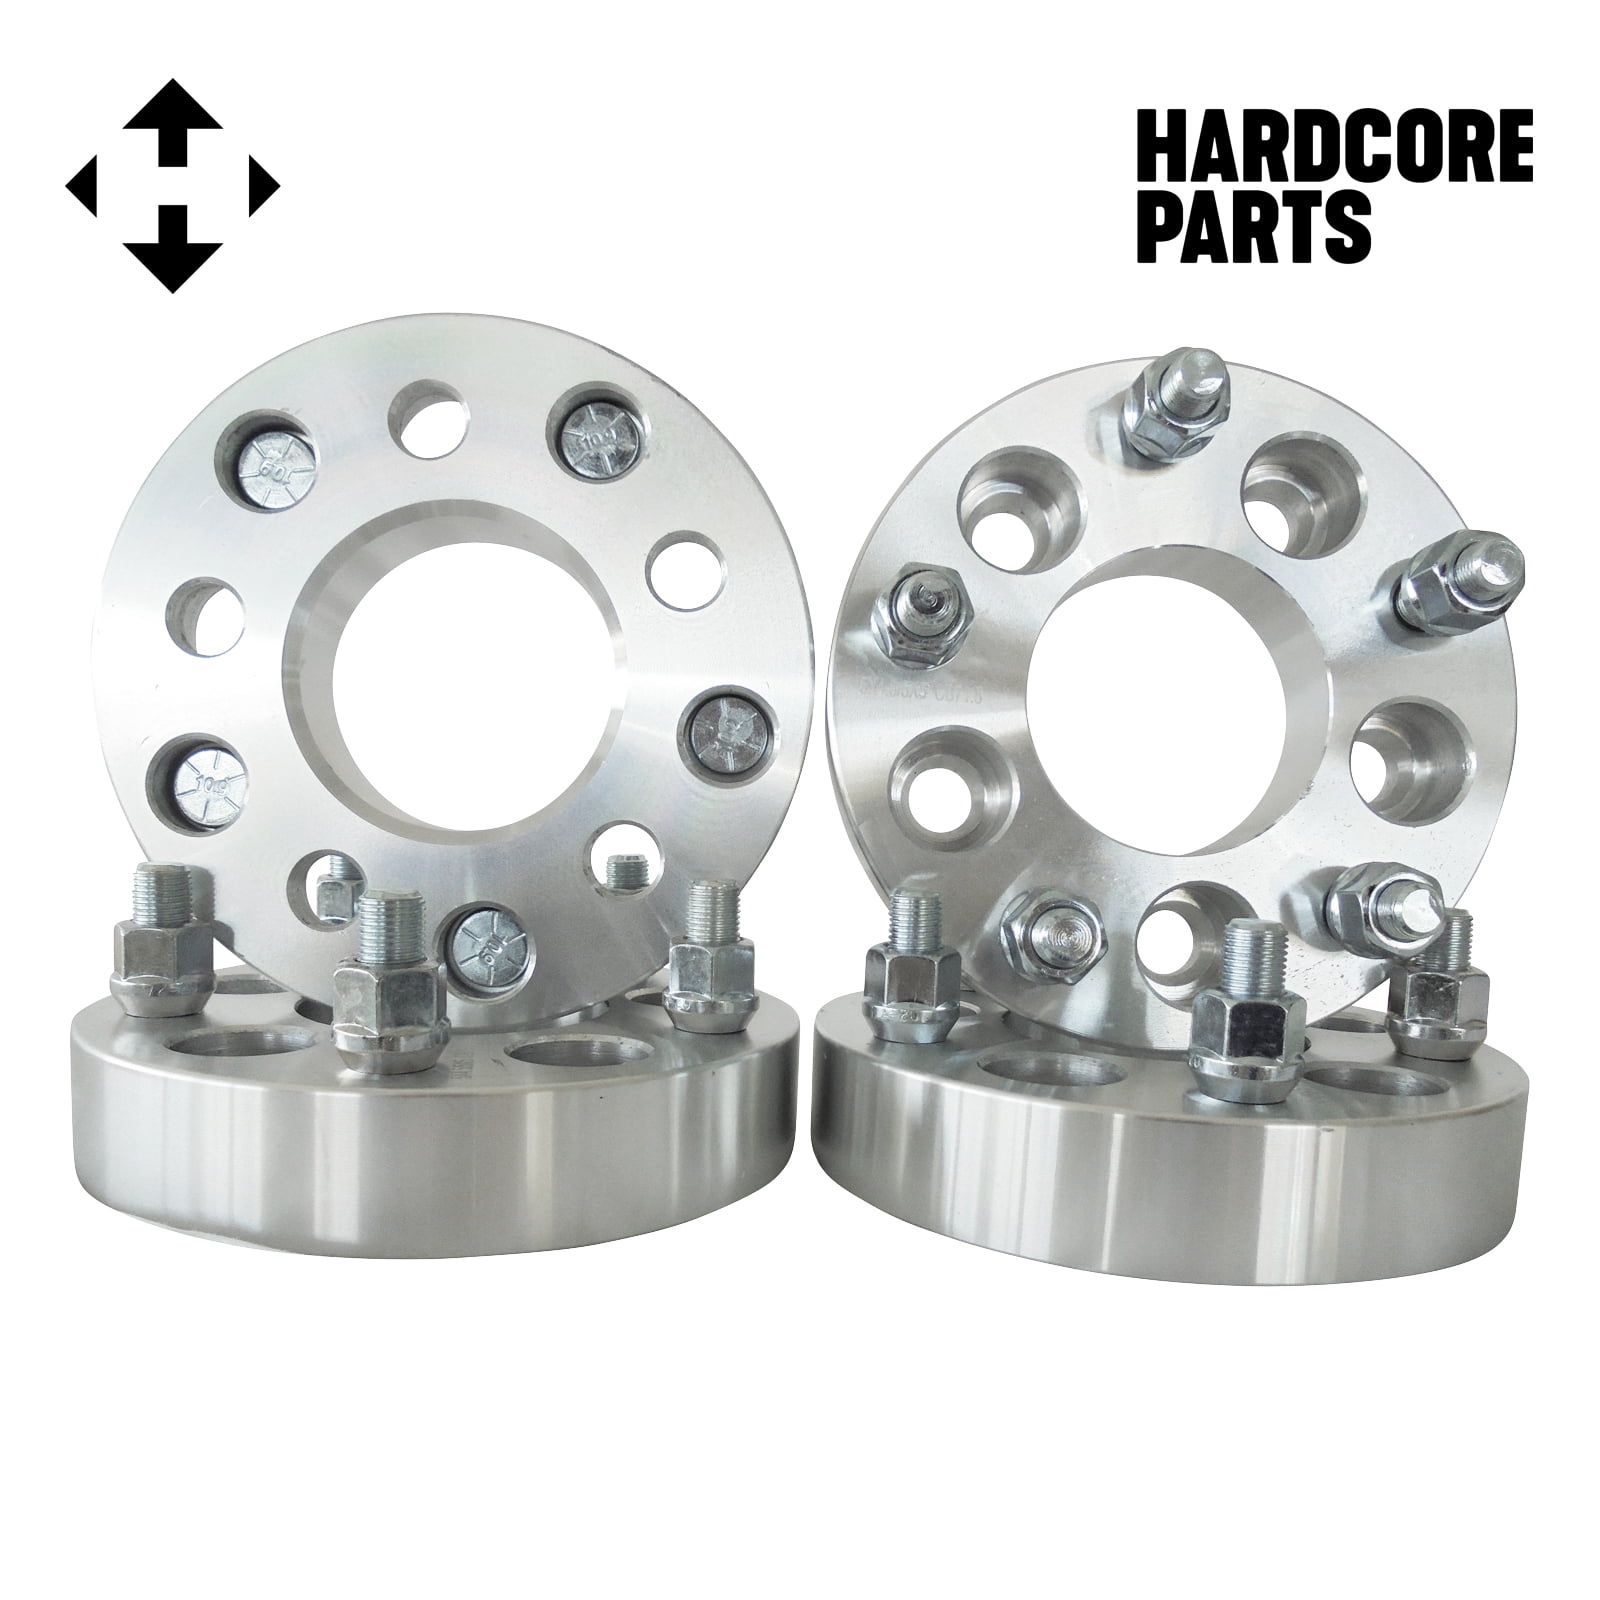 5x114.3 5x4.5 to 5x130 USA Wheel Adapters 1.25 Thick 1/2x20 Studs x 4 Spacers